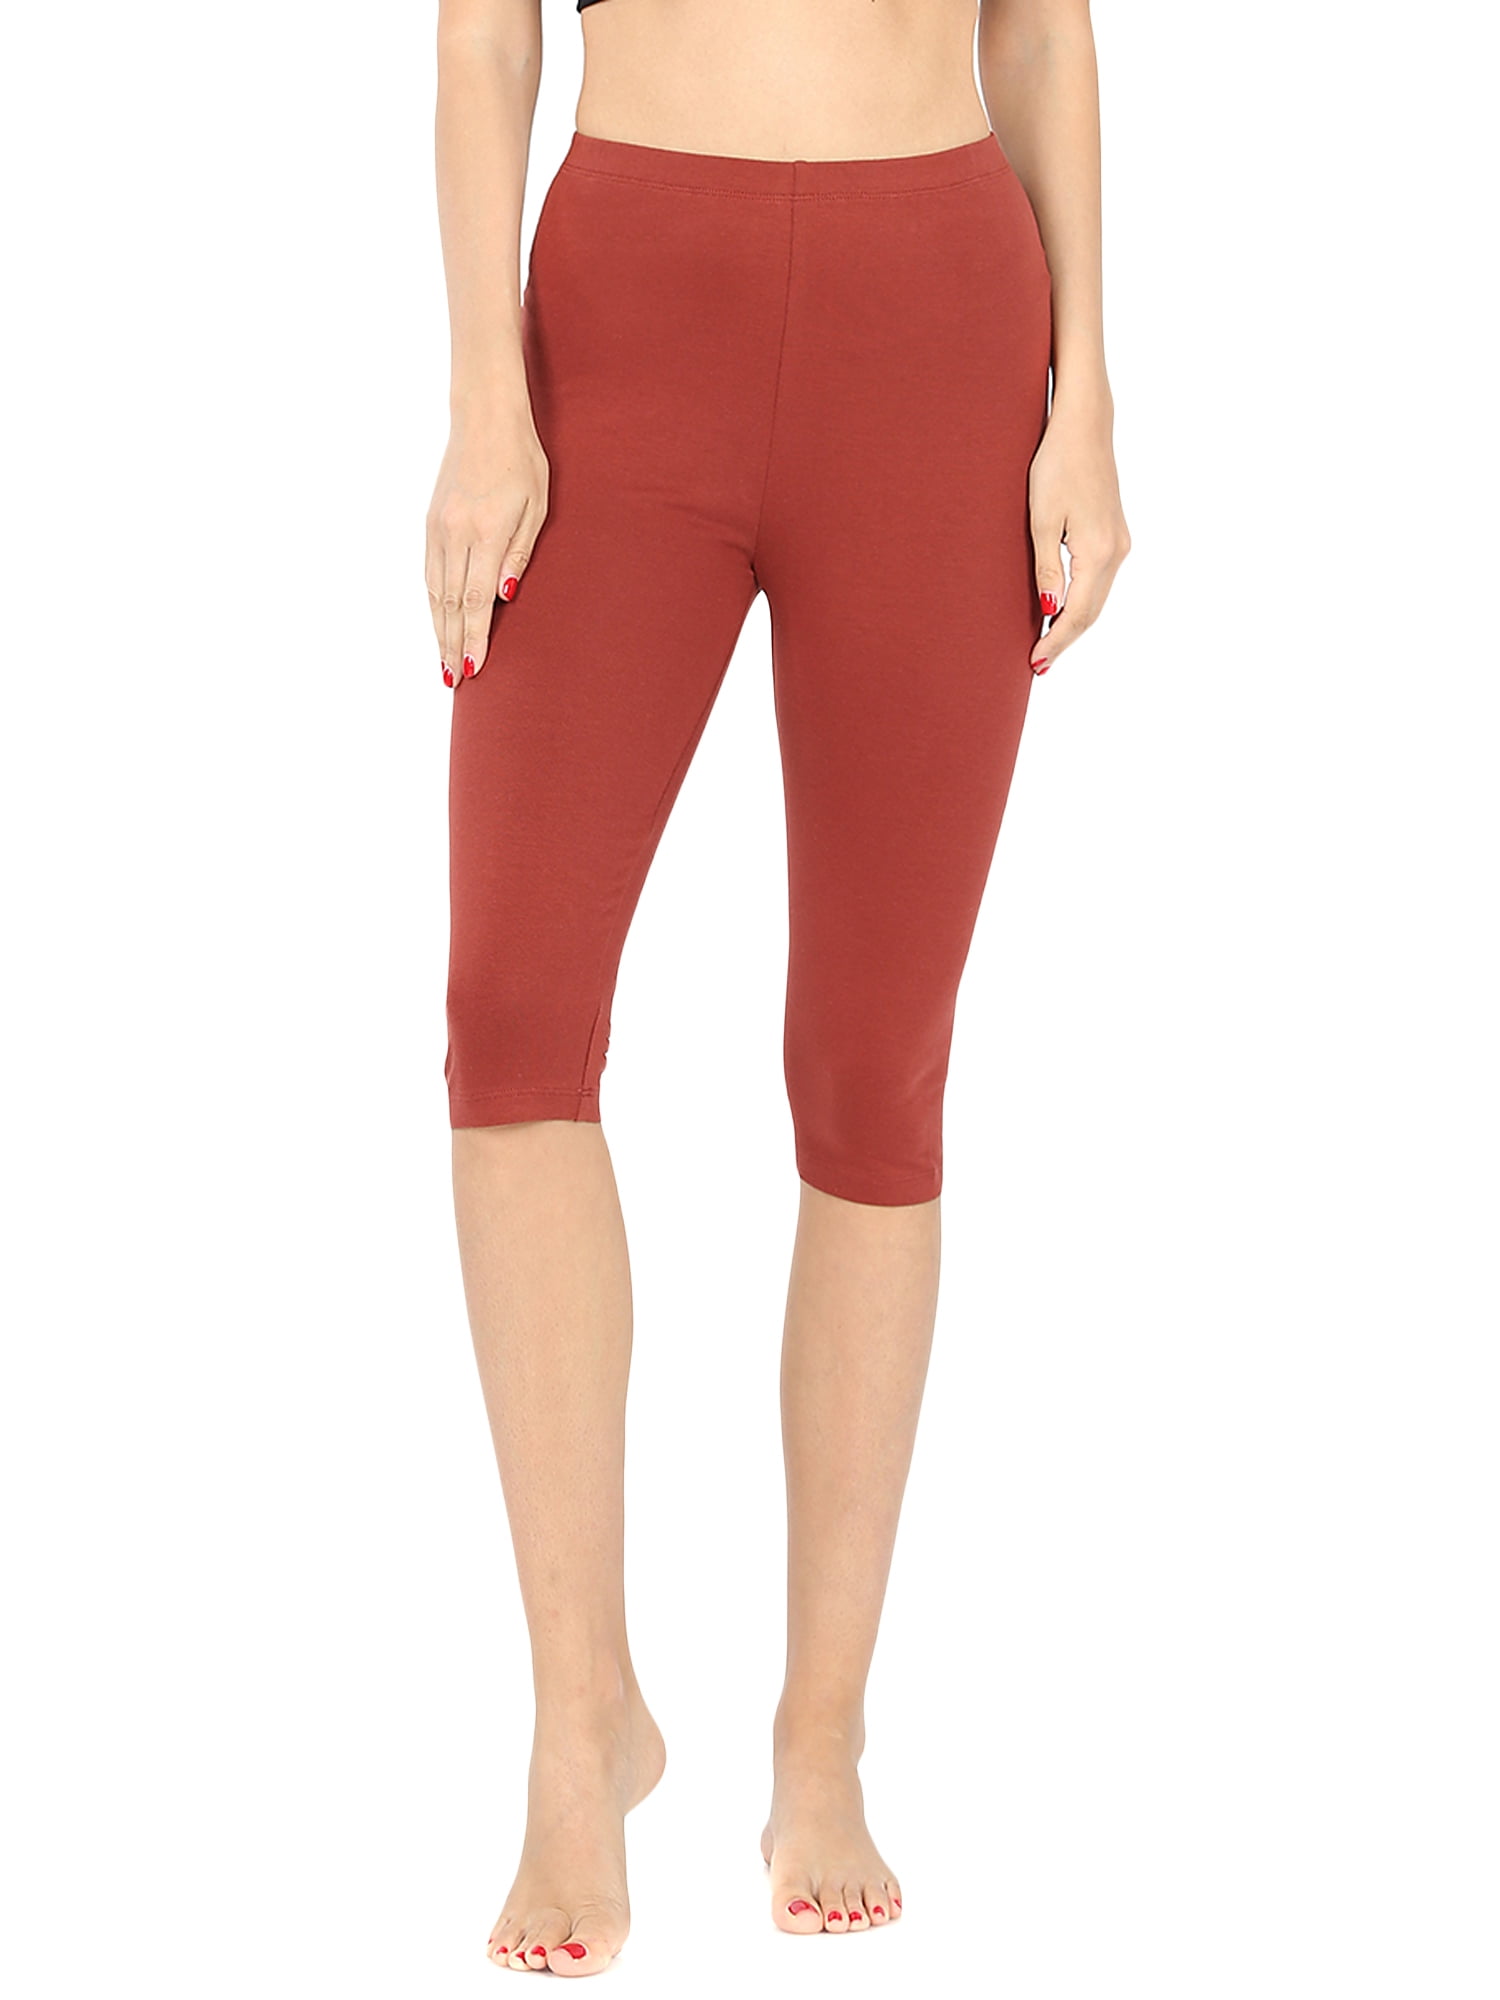 TheLovely - Women & Plus (S-3X) Essential Basic Cotton Spandex Stretch ...